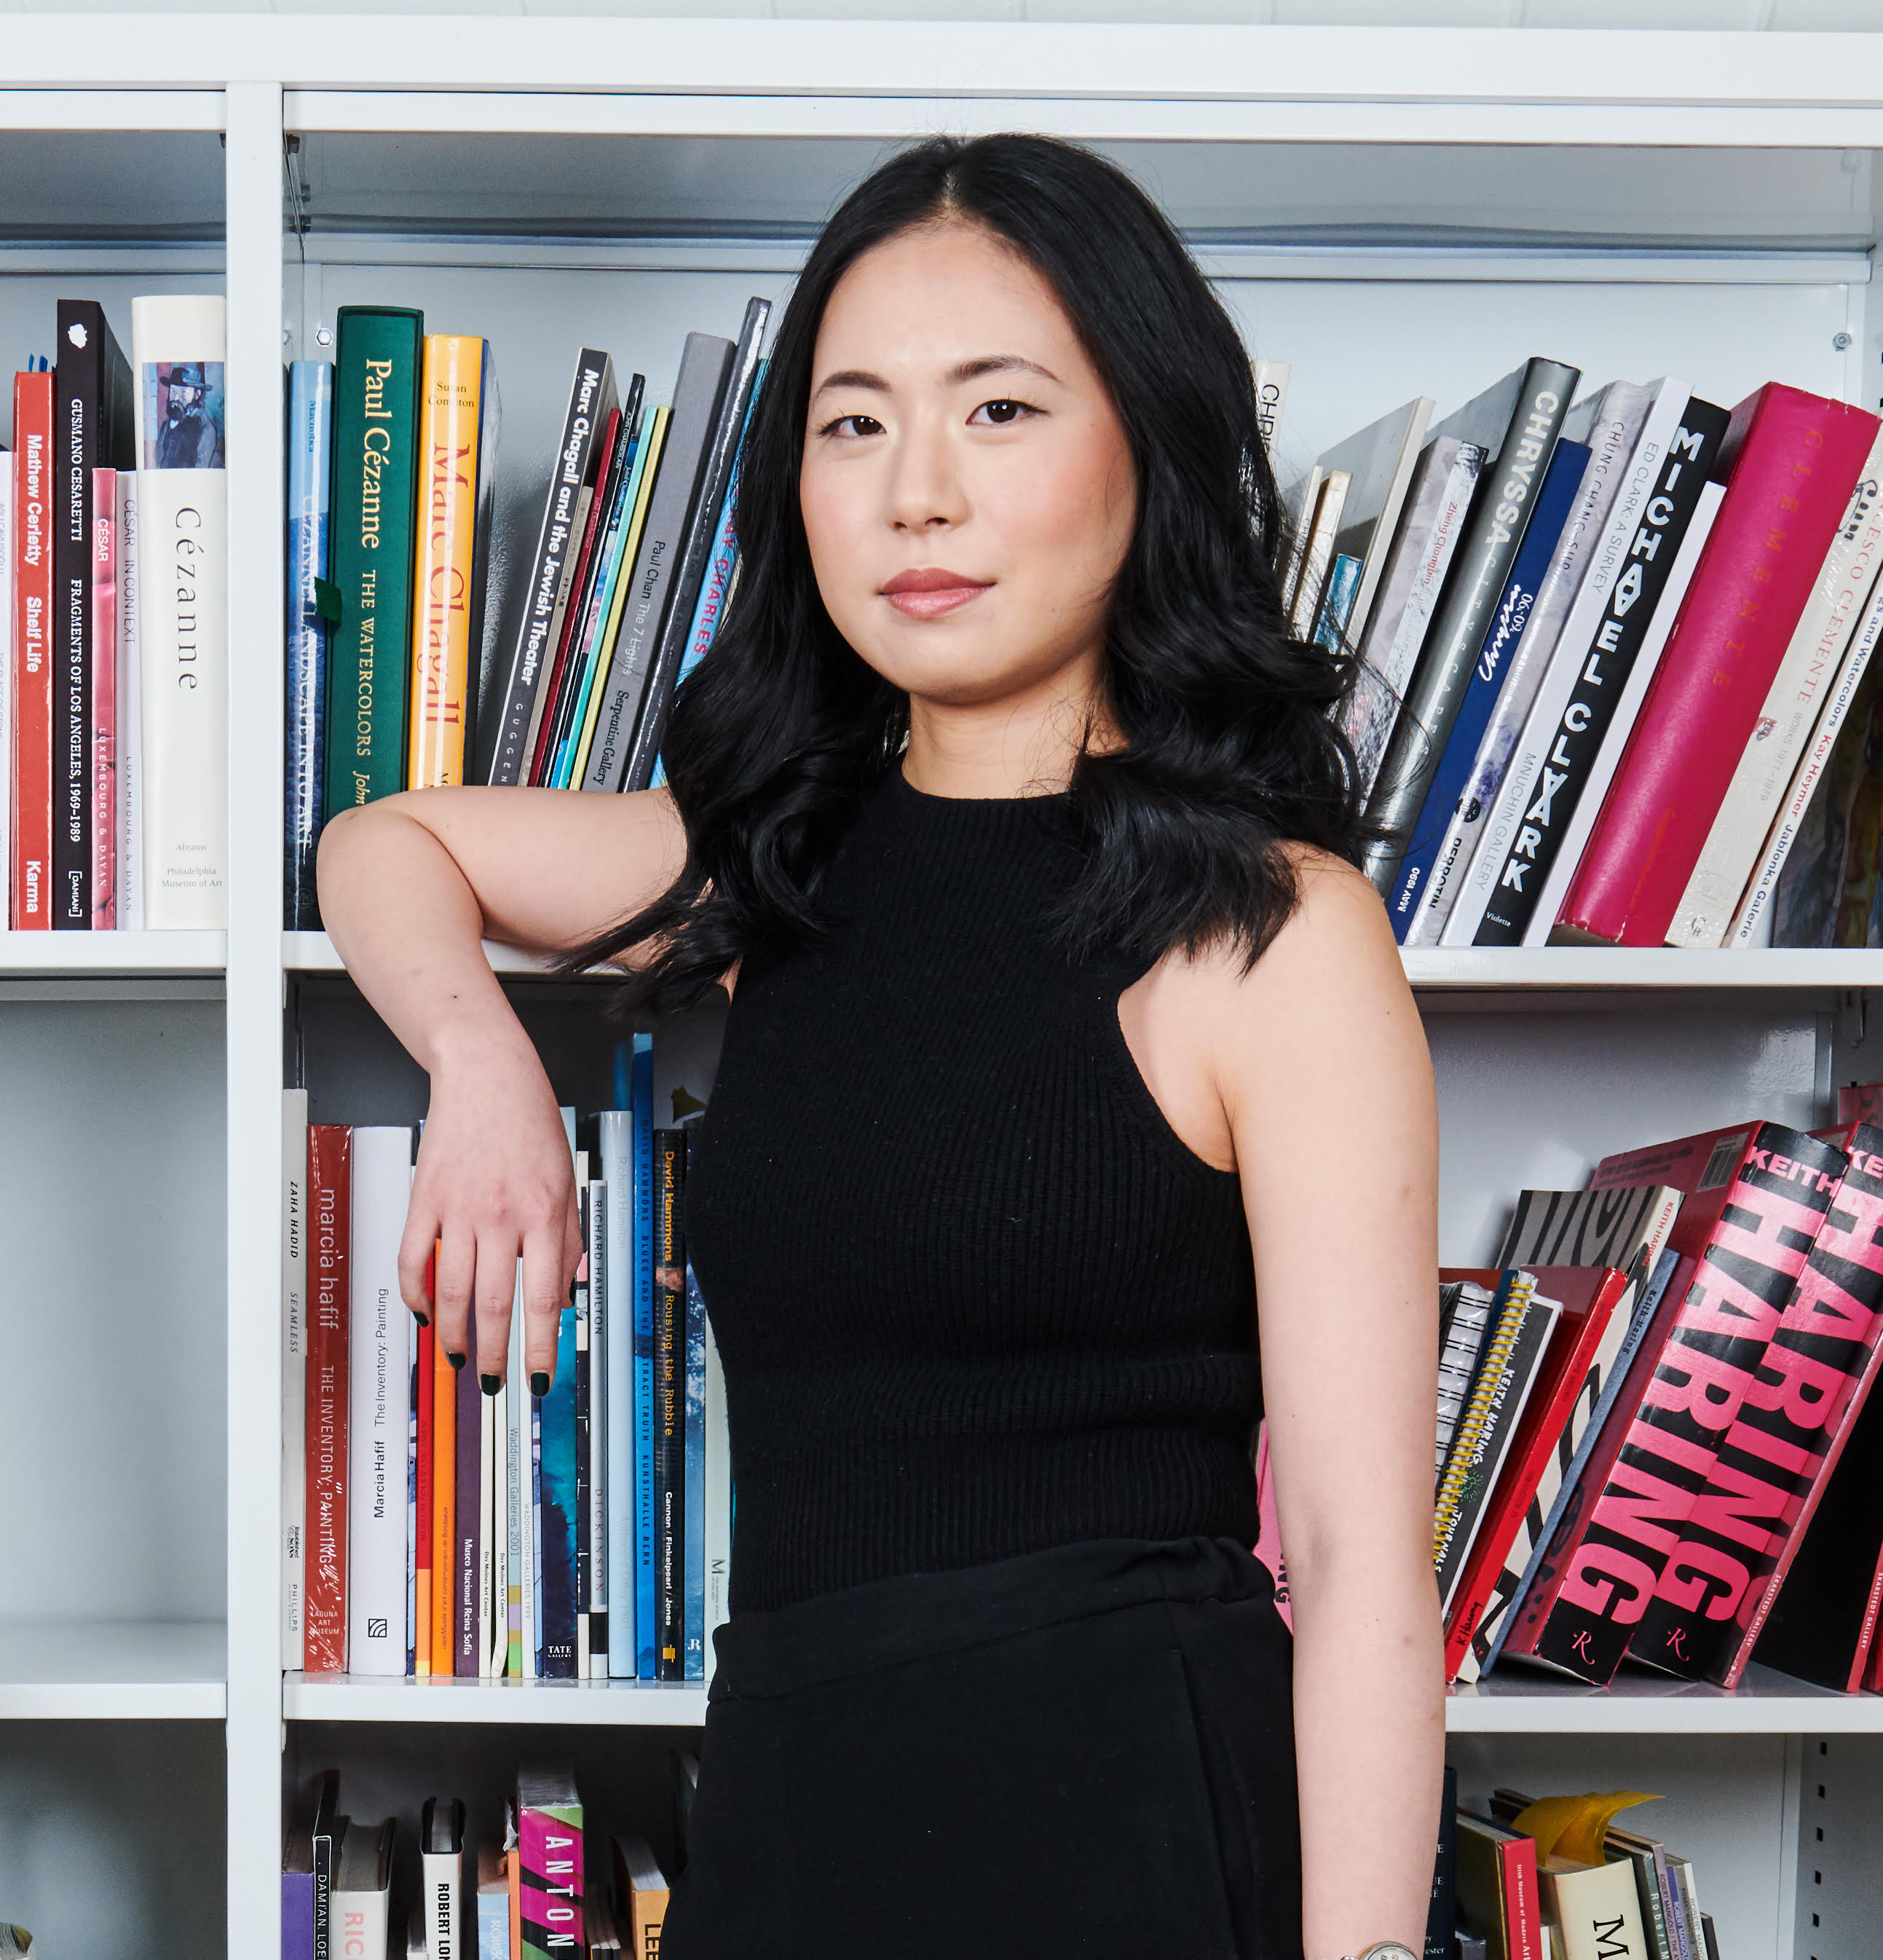 Kathy Huang - Managing Director, Art Advisory and Special Projects at Jeffrey Deitch